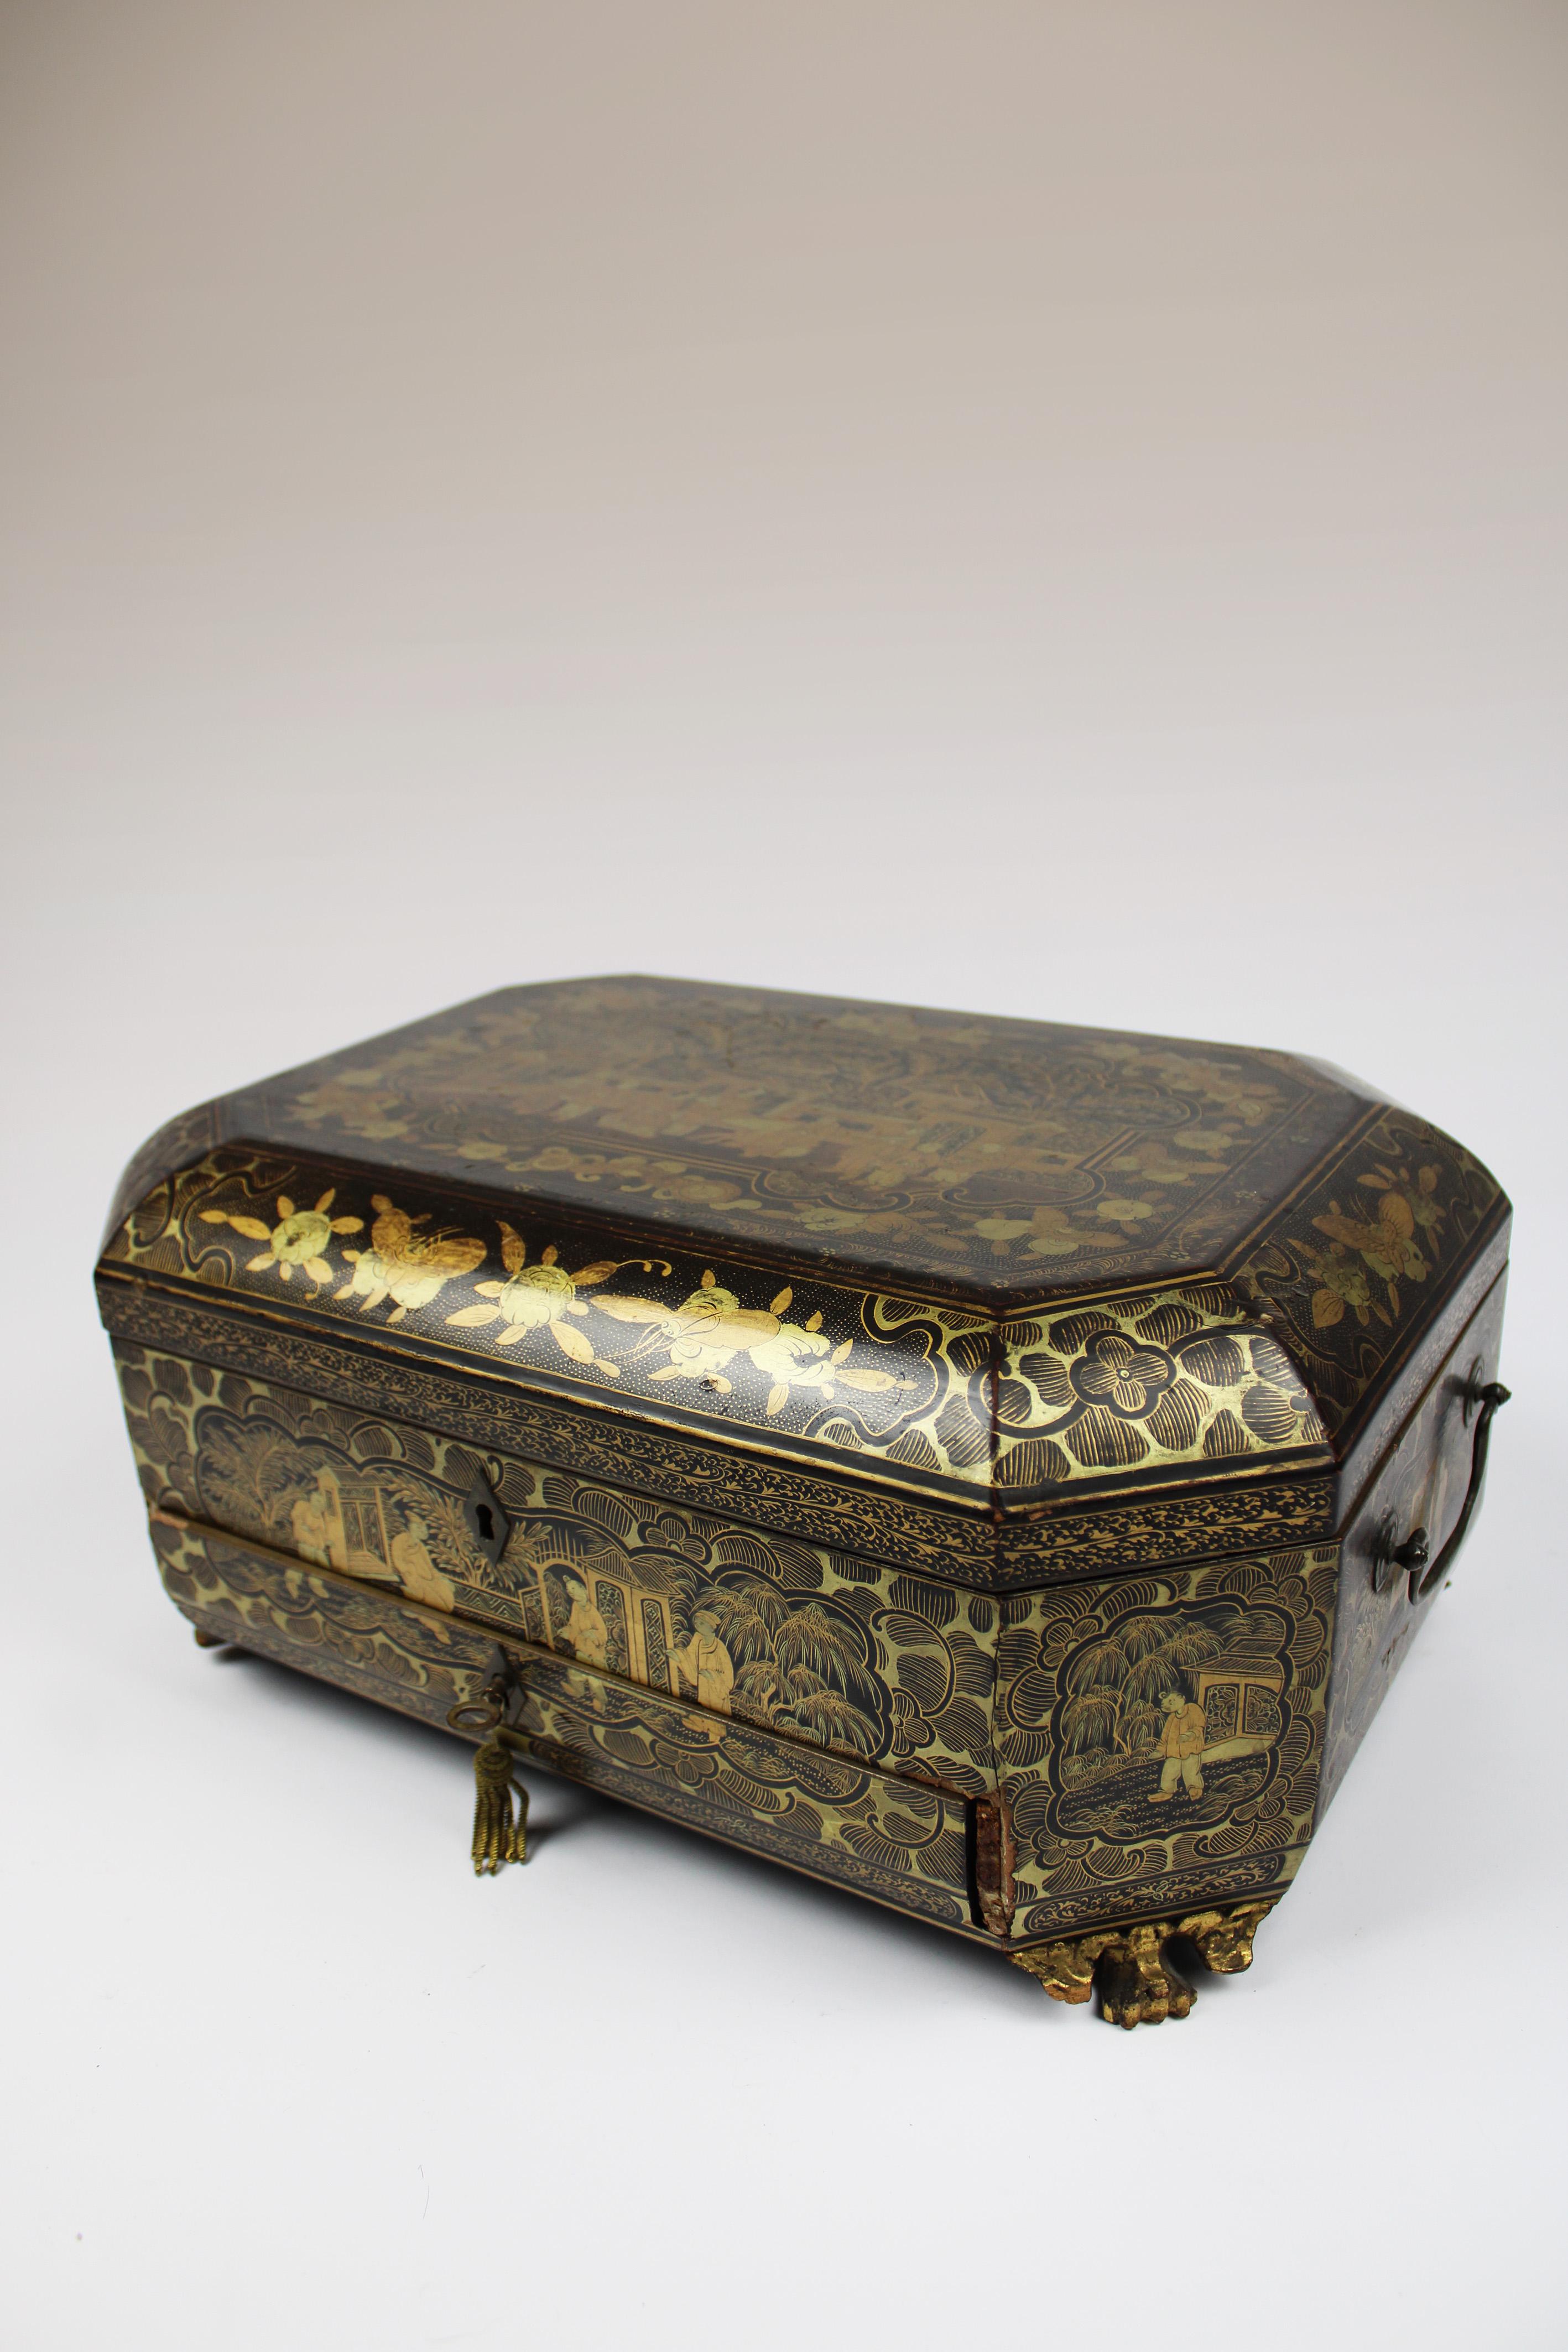 Immerse yourself in the timeless elegance of the early 19th century with this exquisite Chinese export lacquer sewing box. Crafted with meticulous attention to detail, this octagonal-shaped box stands gracefully on delicate feet, showcasing the